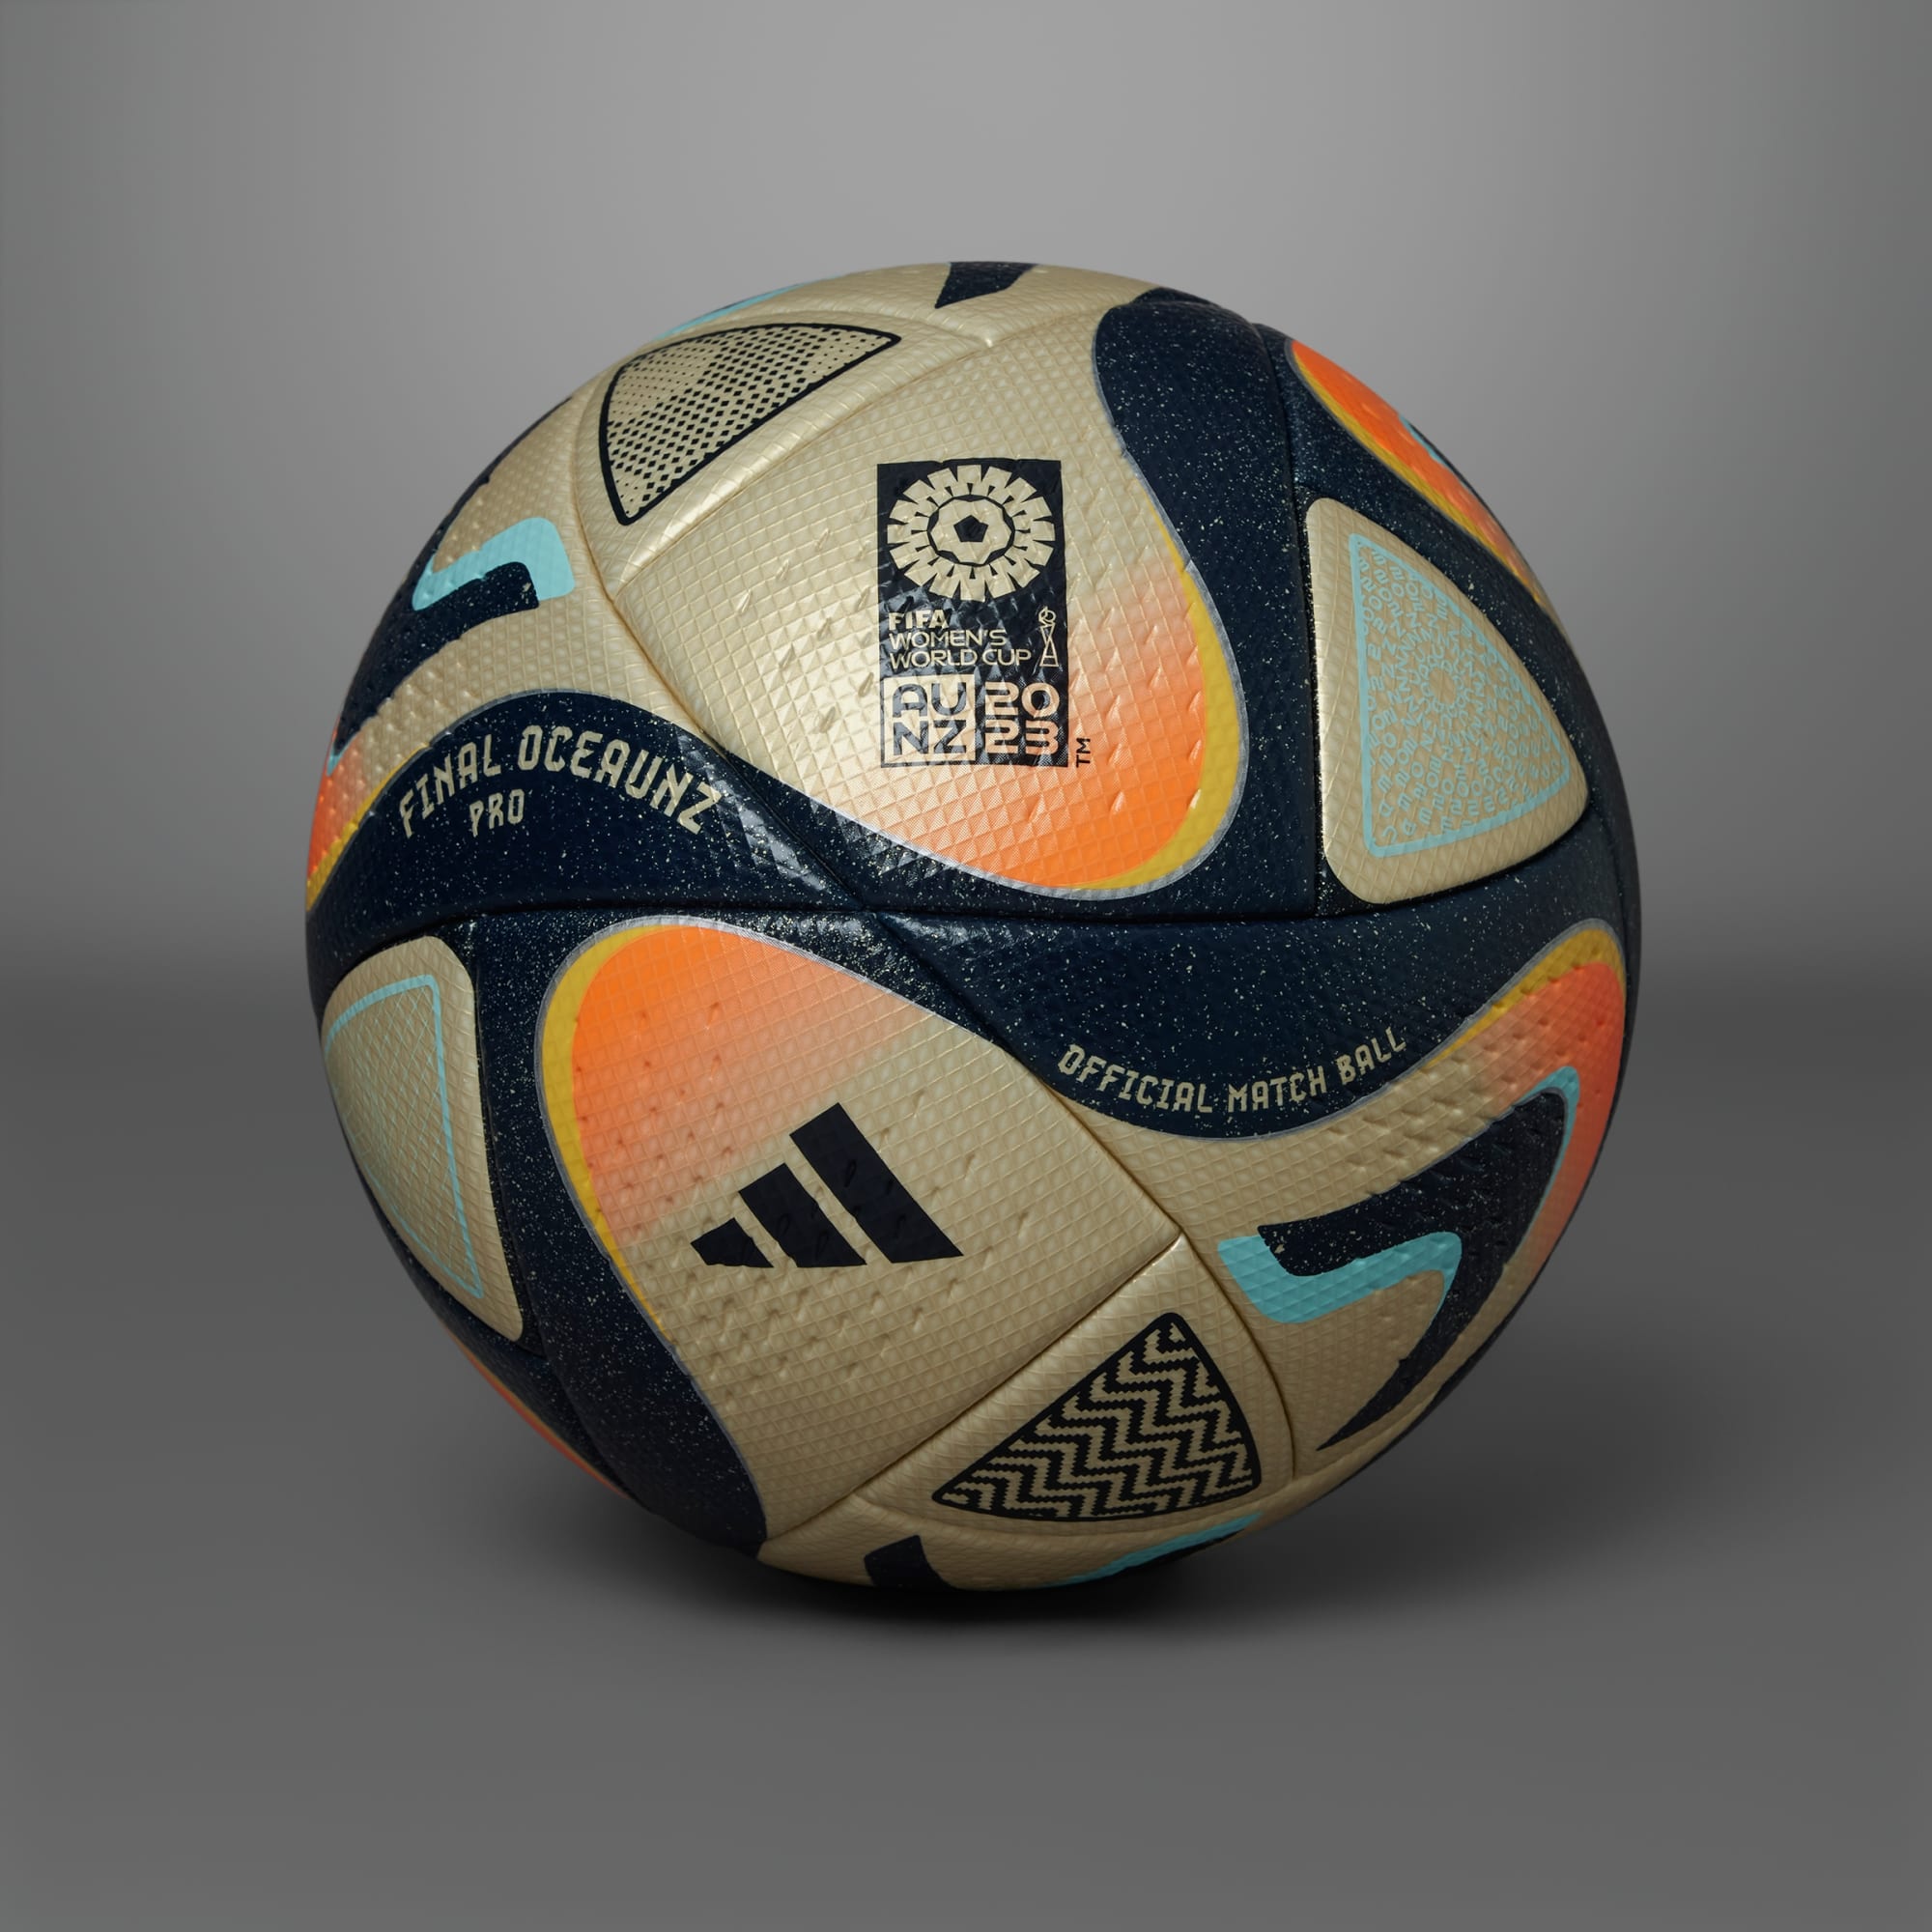 Adidas Brazuca Official Match Ball - FIFA World Cup France